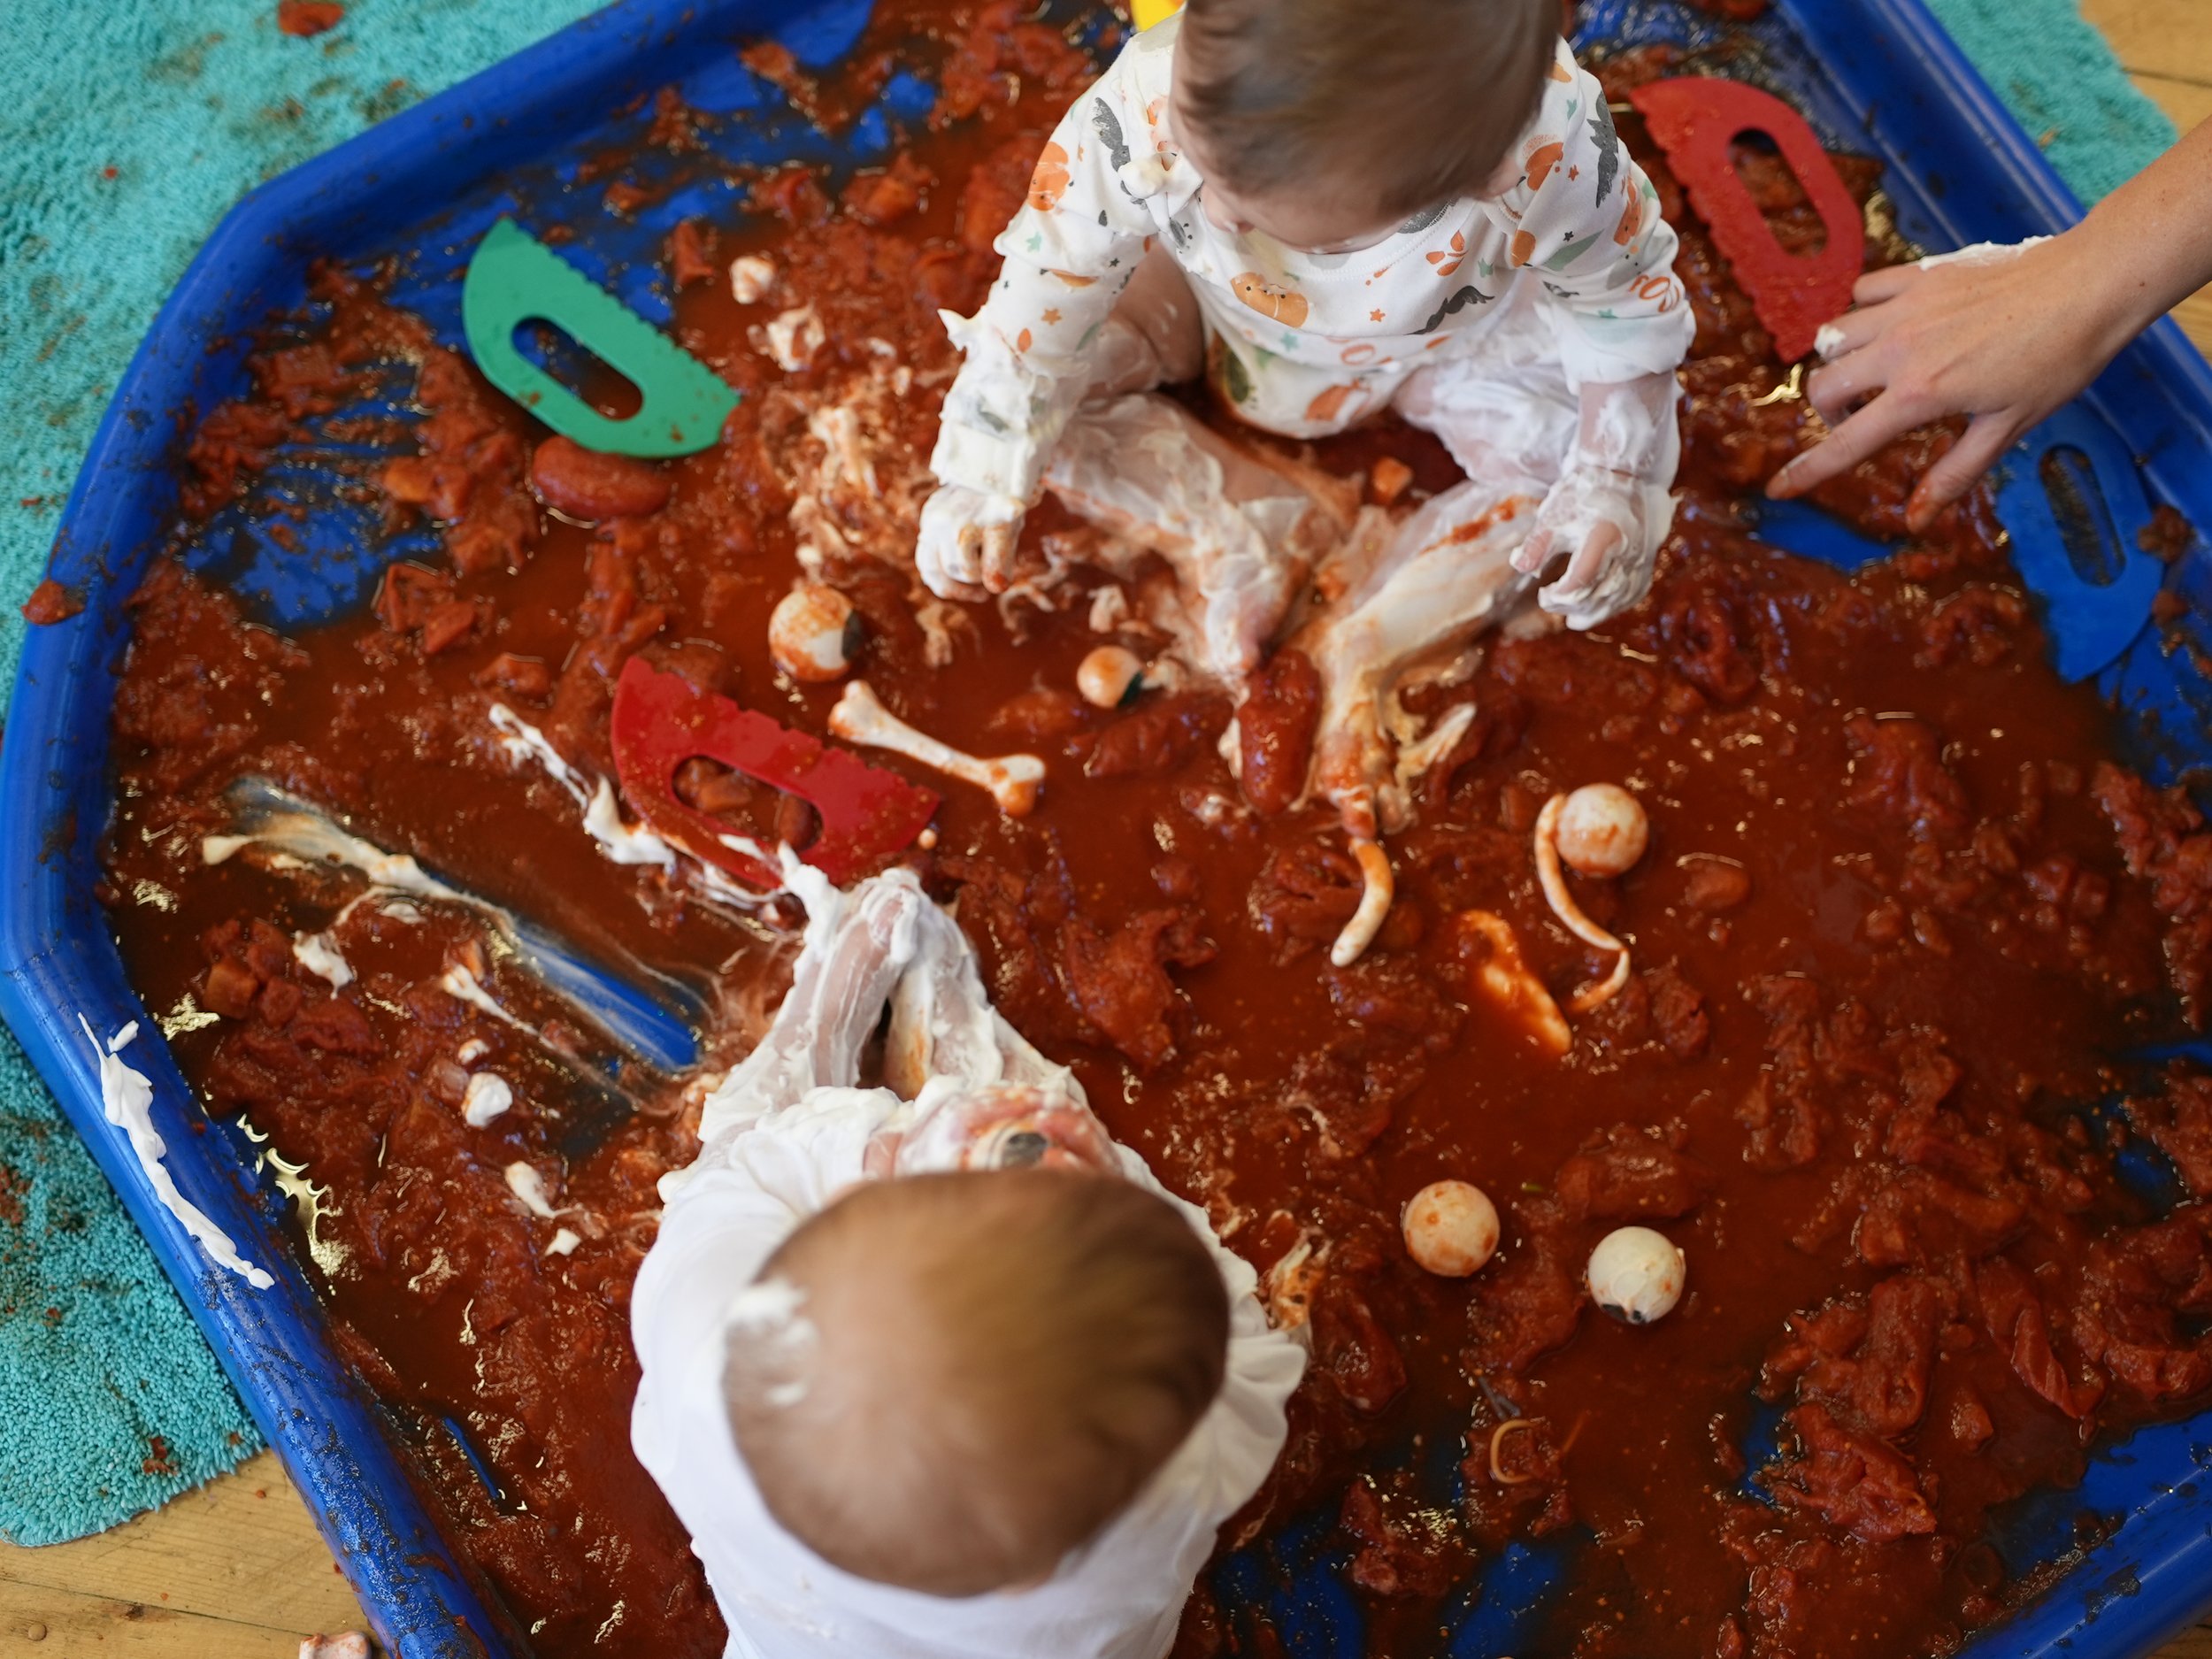 2 babies are playing in a huge tuff tray filled with tinned tomatoes